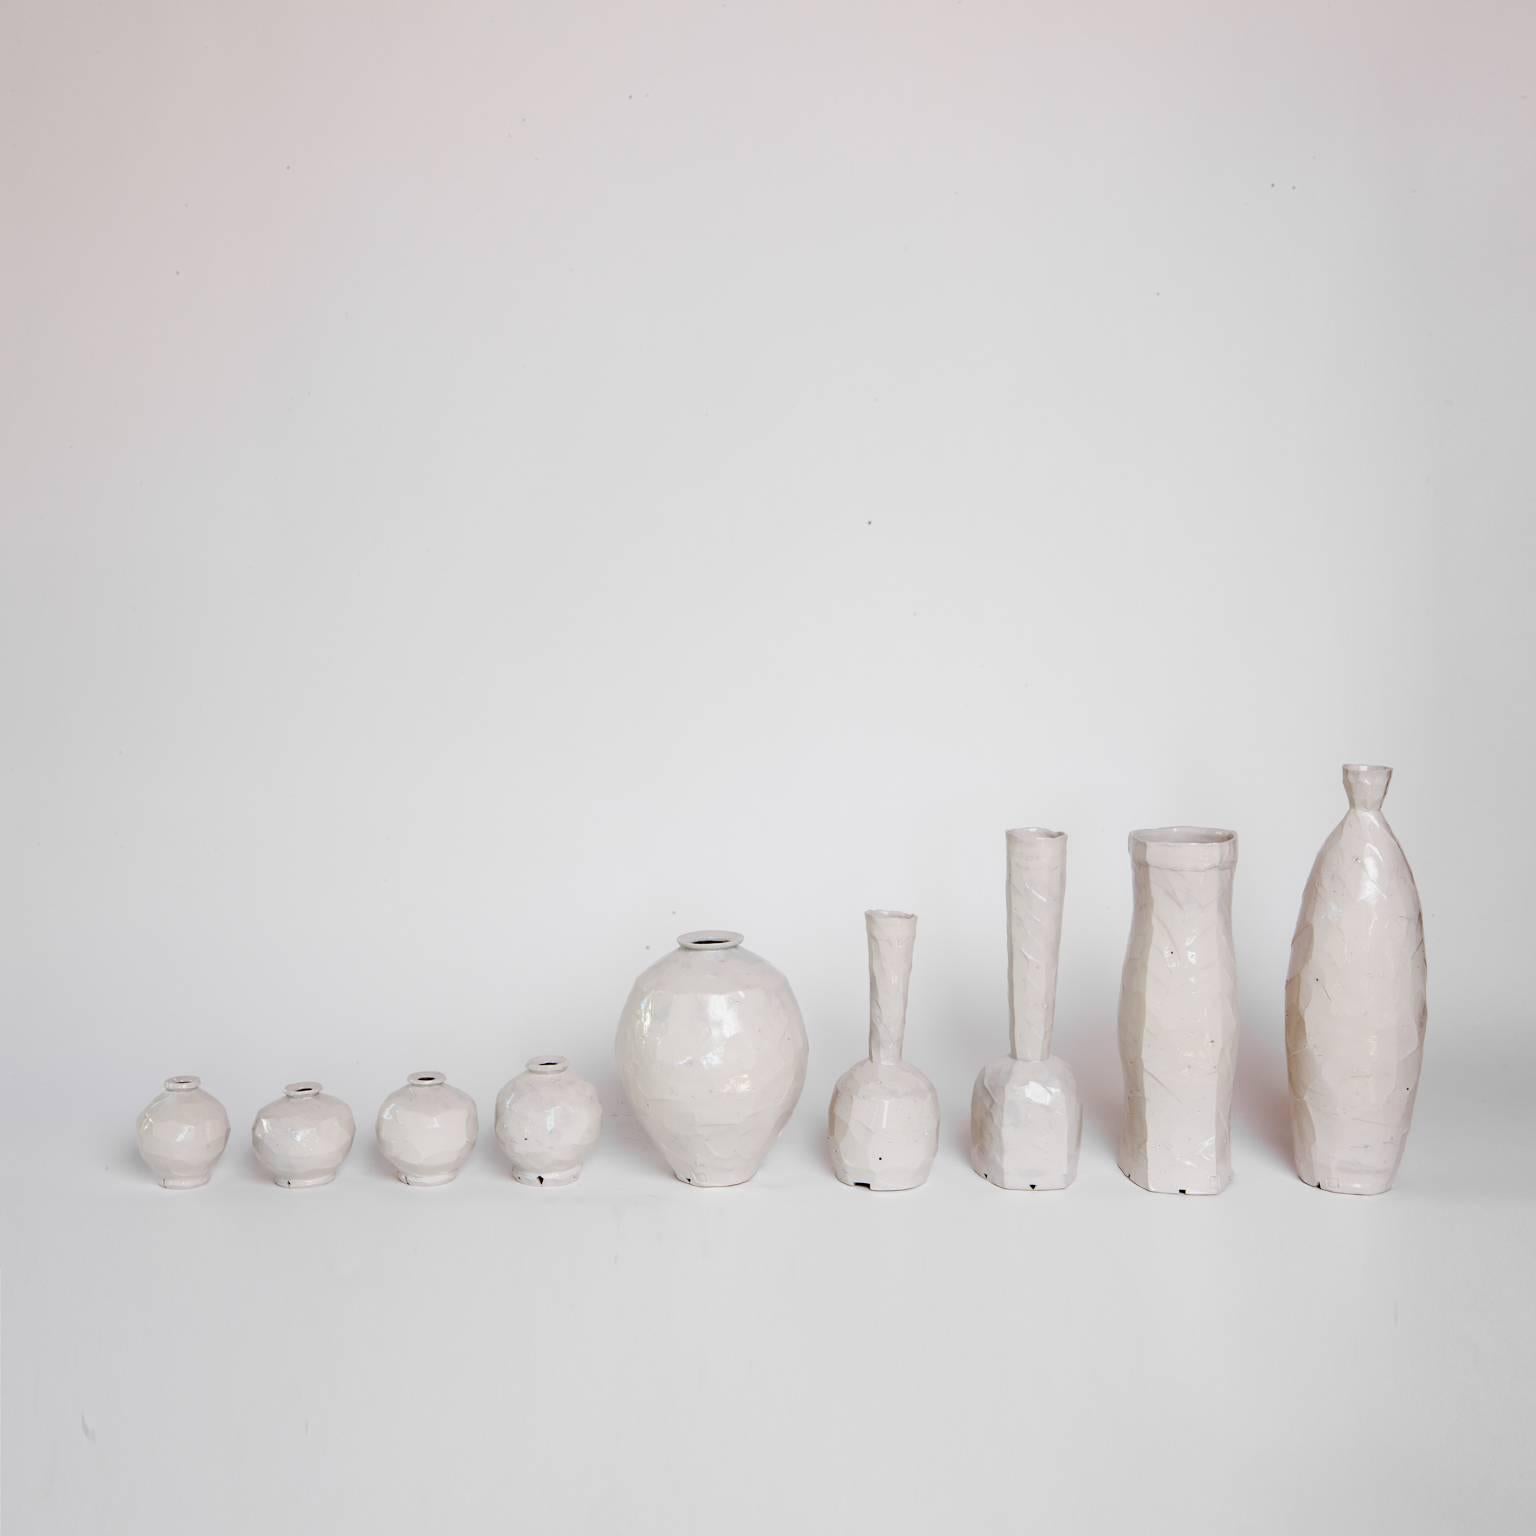 American Collection of Porcelain Vessels by Trent Burkett